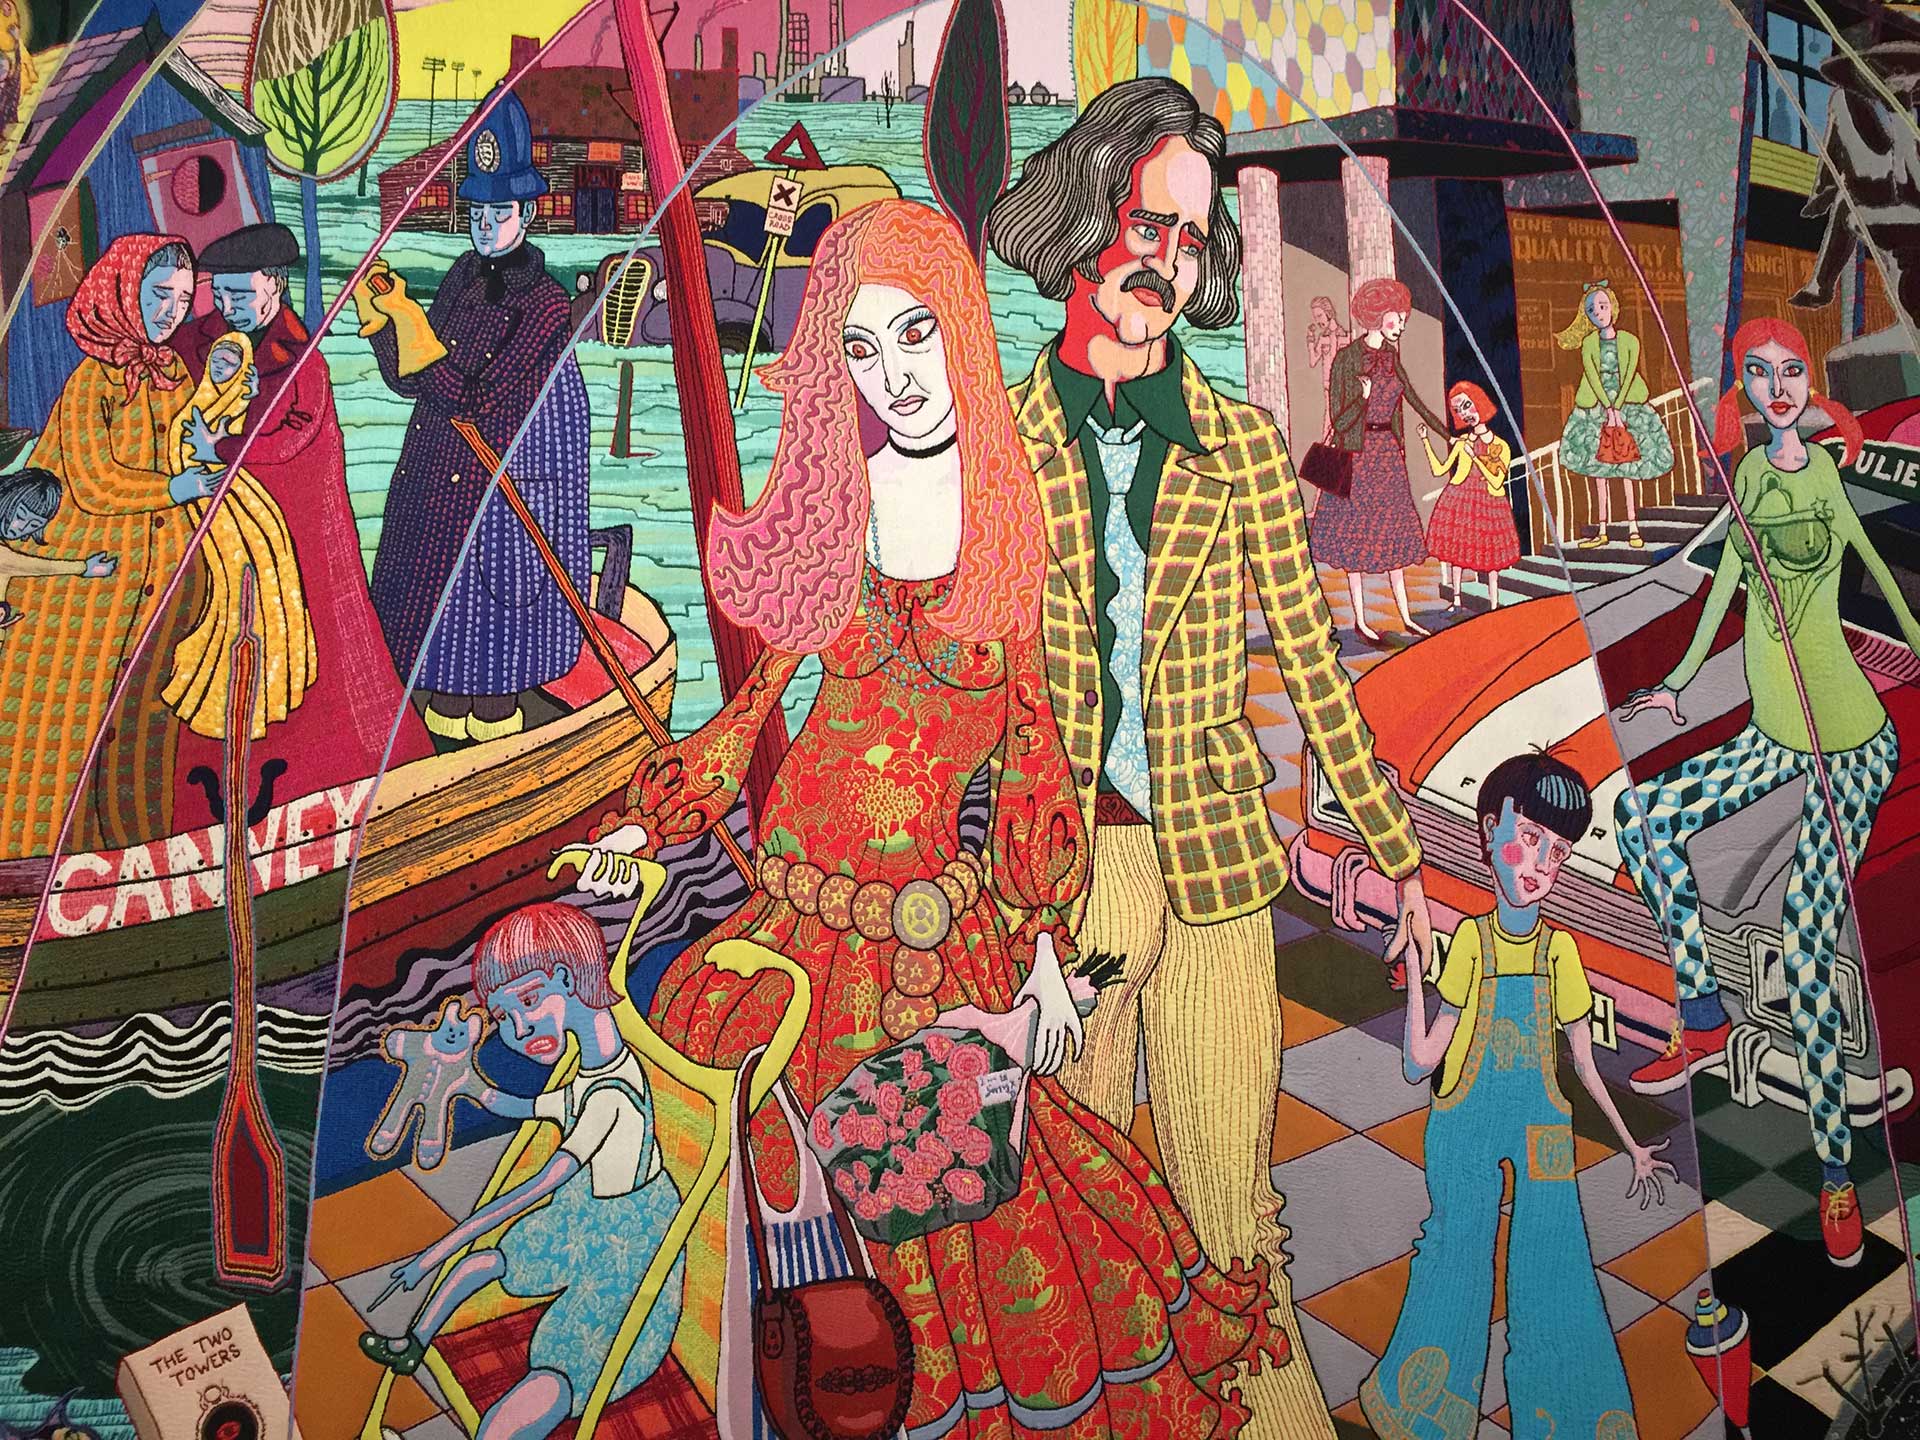 The Story of a Life by Grayson Perry, currently on display at New Brewery Arts in Cirencester